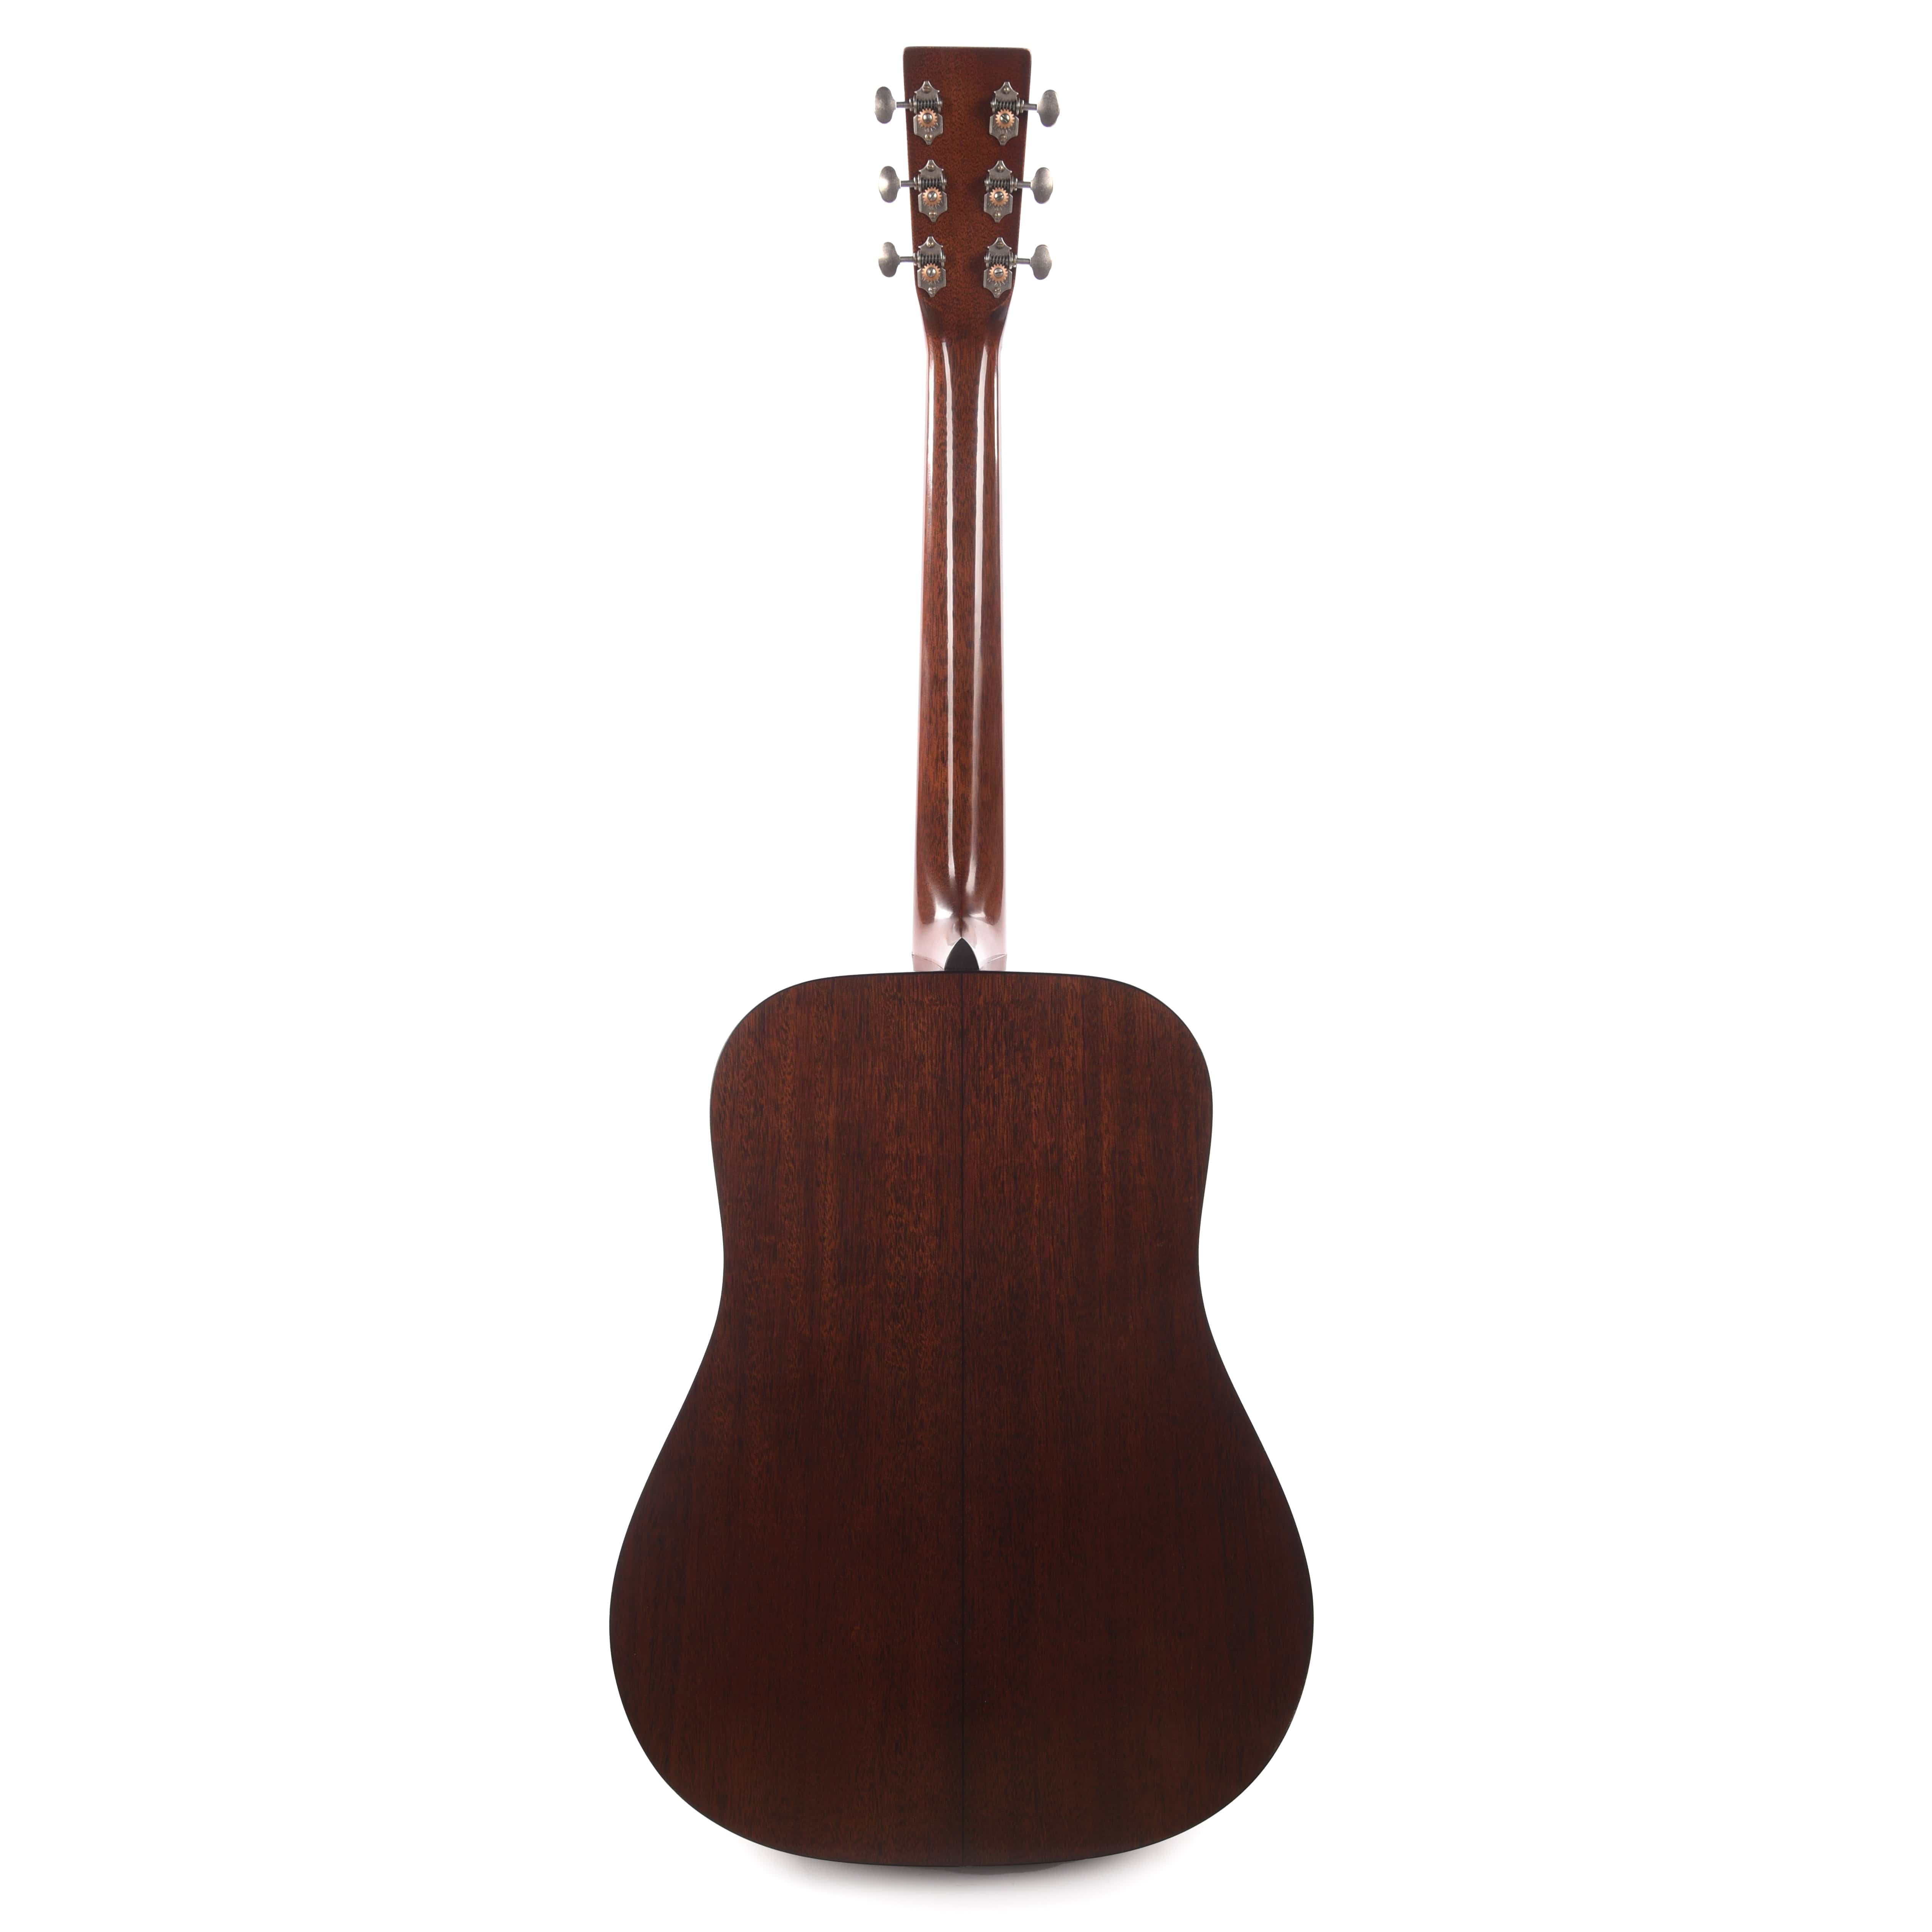 Martin Custom Shop Authentic D-18 1937 Stage 1 Aging Adirondack Spruce/Genuine Mahogany Natural Acoustic Guitars / Dreadnought